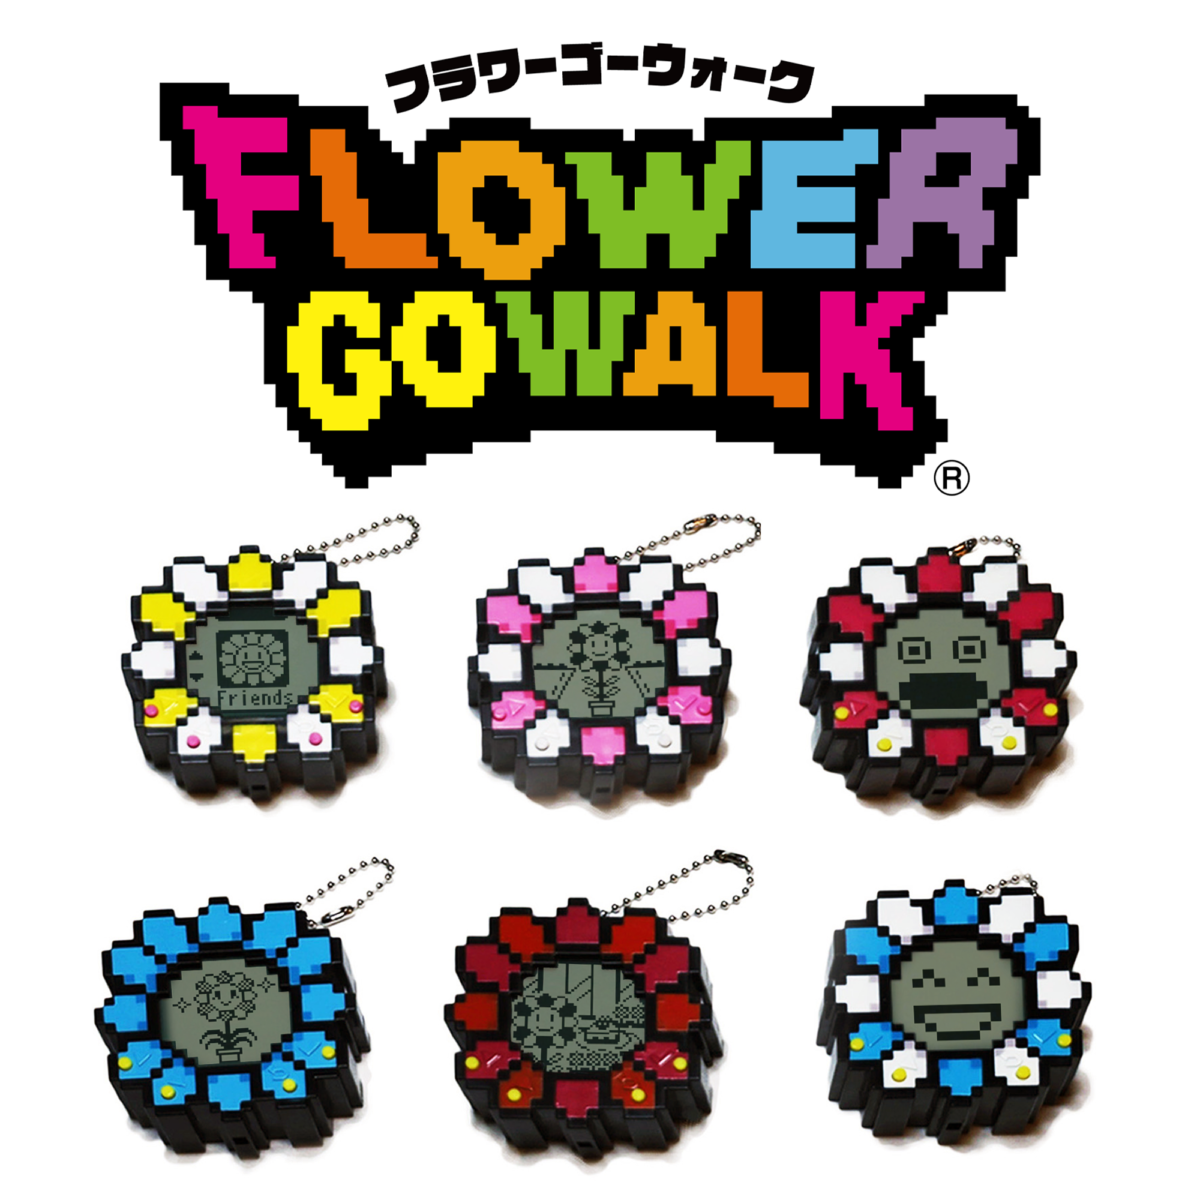 【Takashi Murakami / kaikai kiki】<br> The new game 「Flower Go Walk」 will be released exclusively at online shops from 20:00 on Tuesday, December 6th!